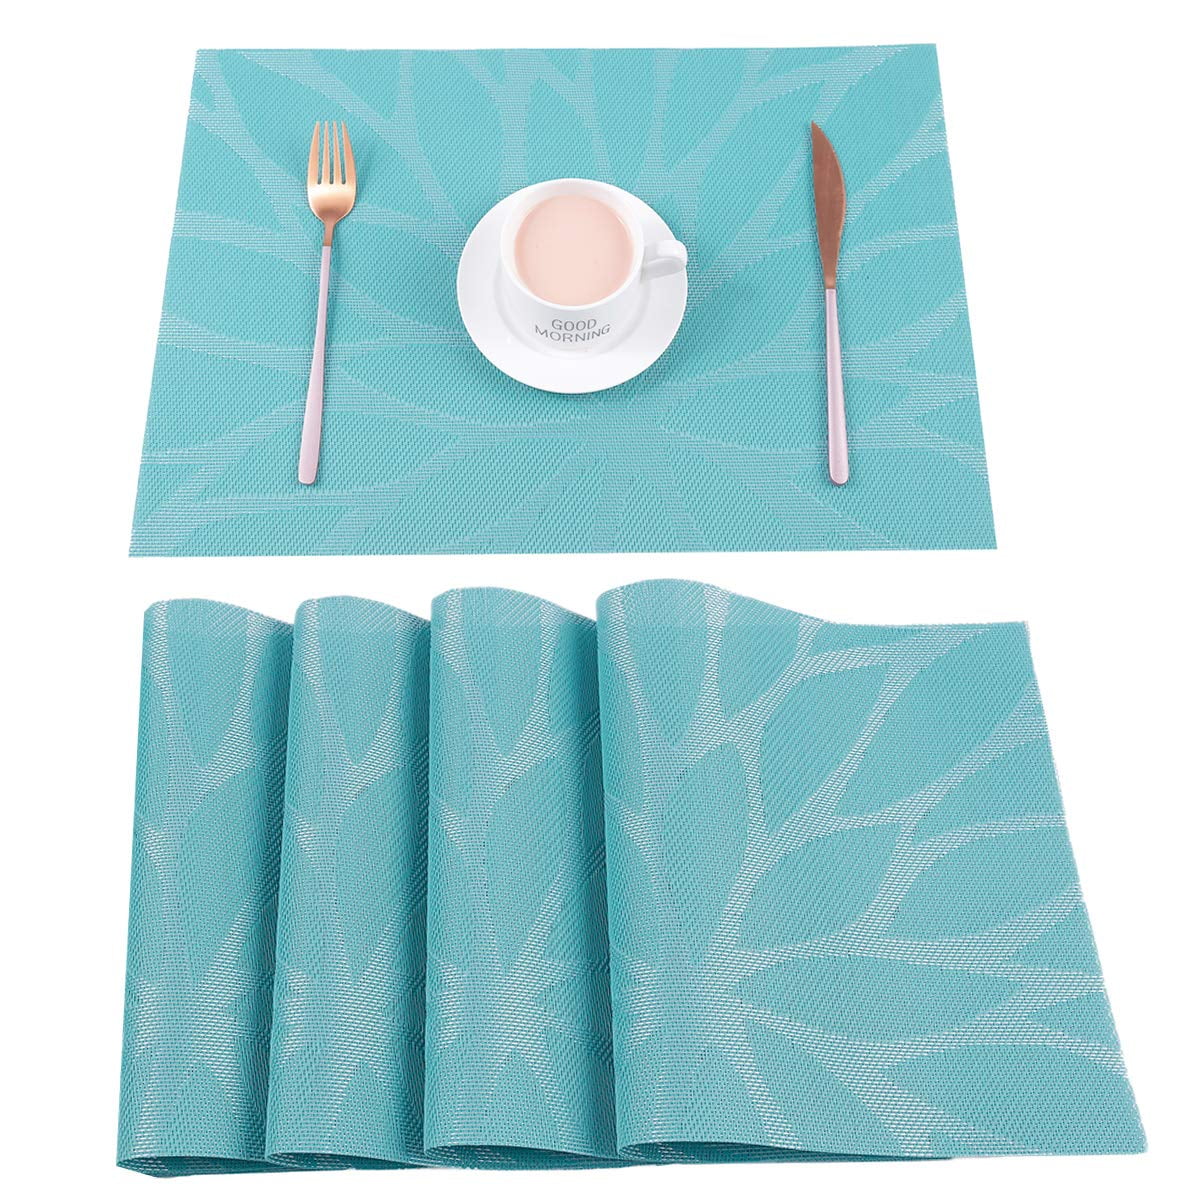 DIFFERENT COLOURS LEATHER LOOK PVC TABLE MATS & COASTERS IN SETS OF FOUR 